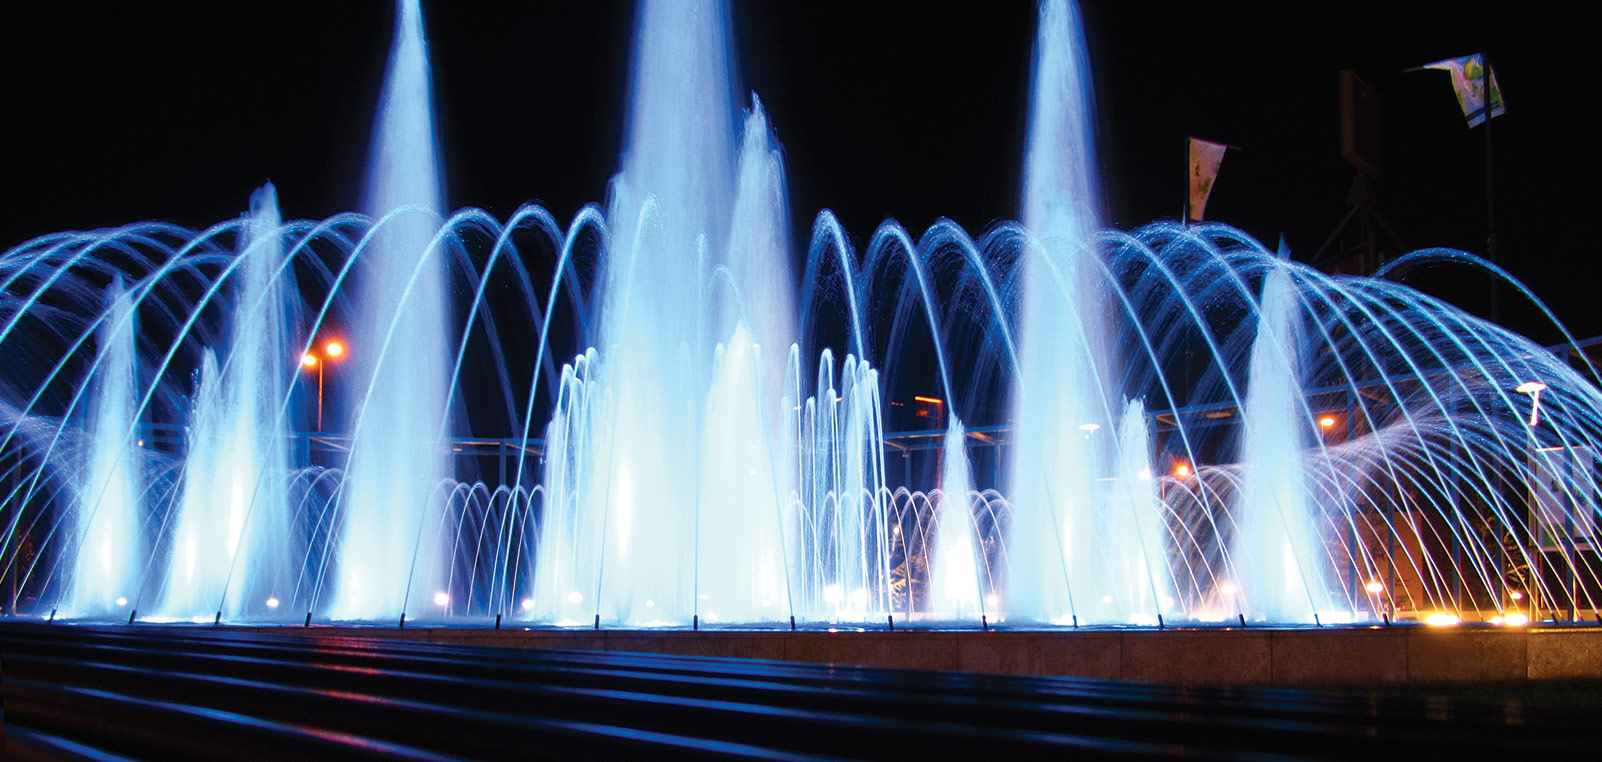 Fontana underwater lighting reference photo of UL800 lighting up a fountain